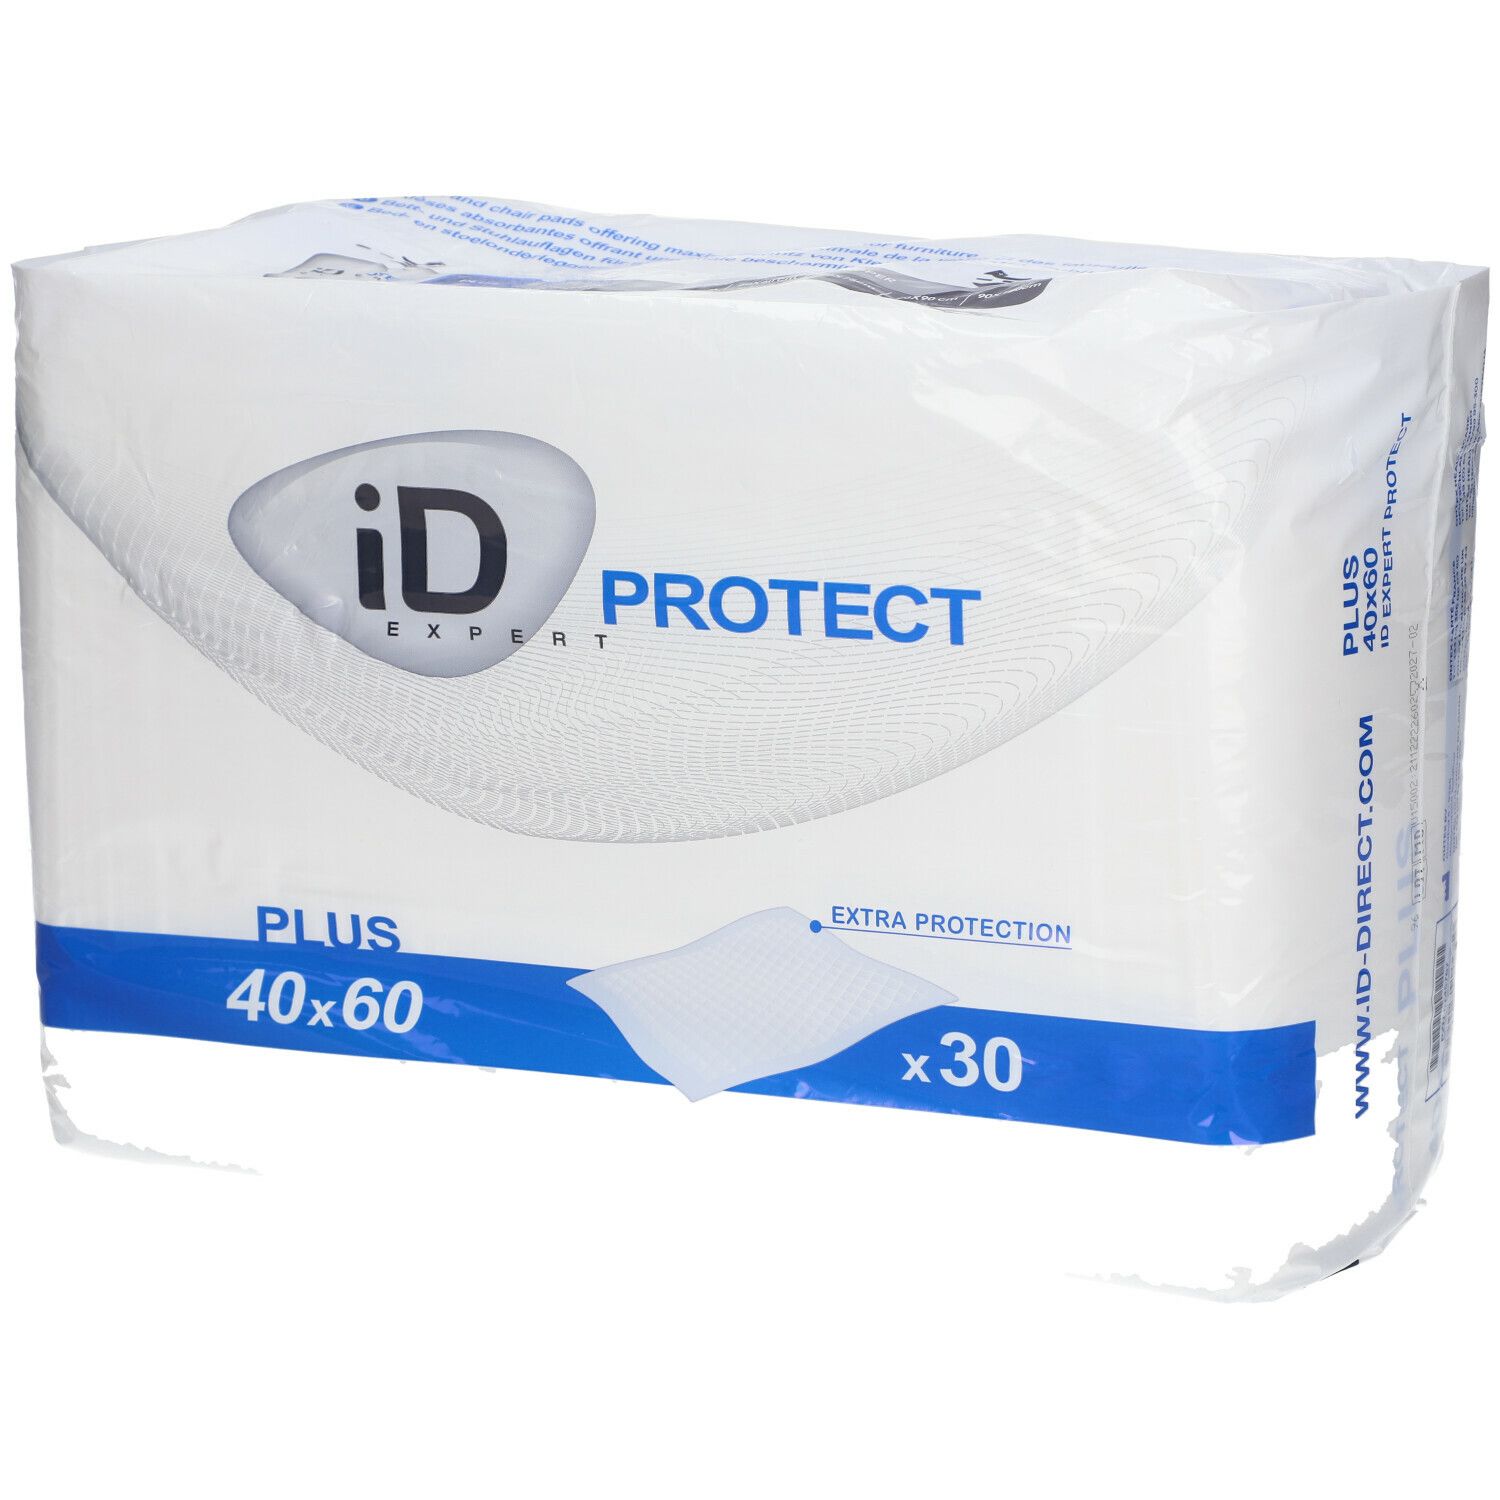 Image of iD EXPERT Protect Plus 40 x 60